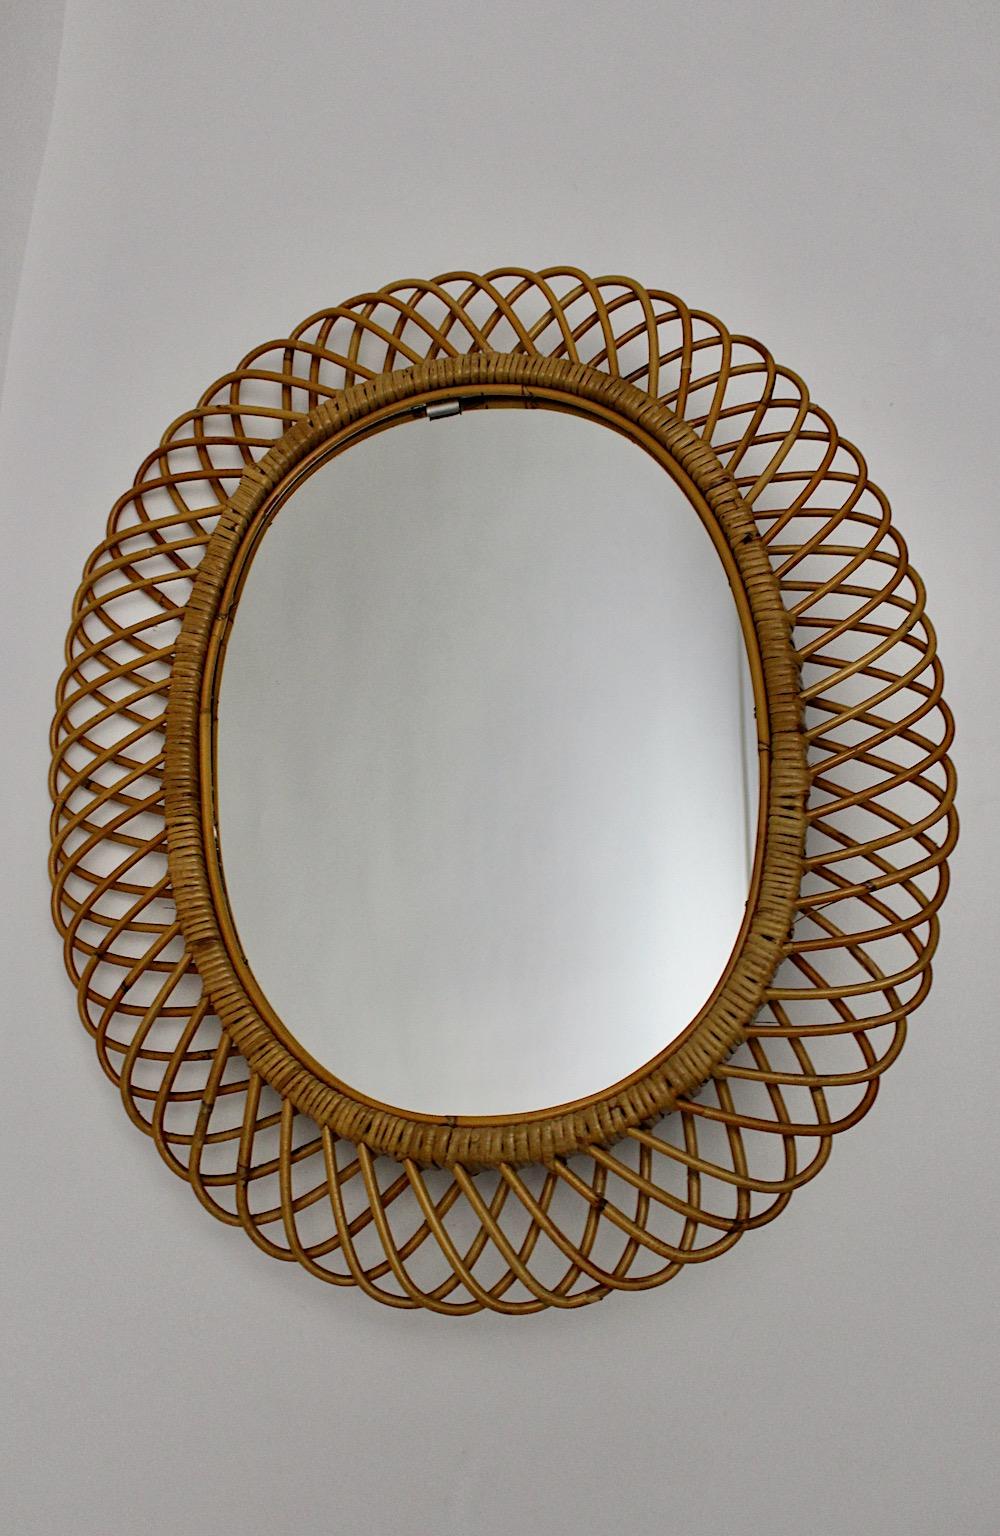 Mid-Century Modern vintage organic sunburst mirror or wall mirror from rattan and mirror glass, 1960s Italy.
While the large size from this sunburst mirror allows to hang up in an entryway or about a fireplace the charming sunburst- like mirror